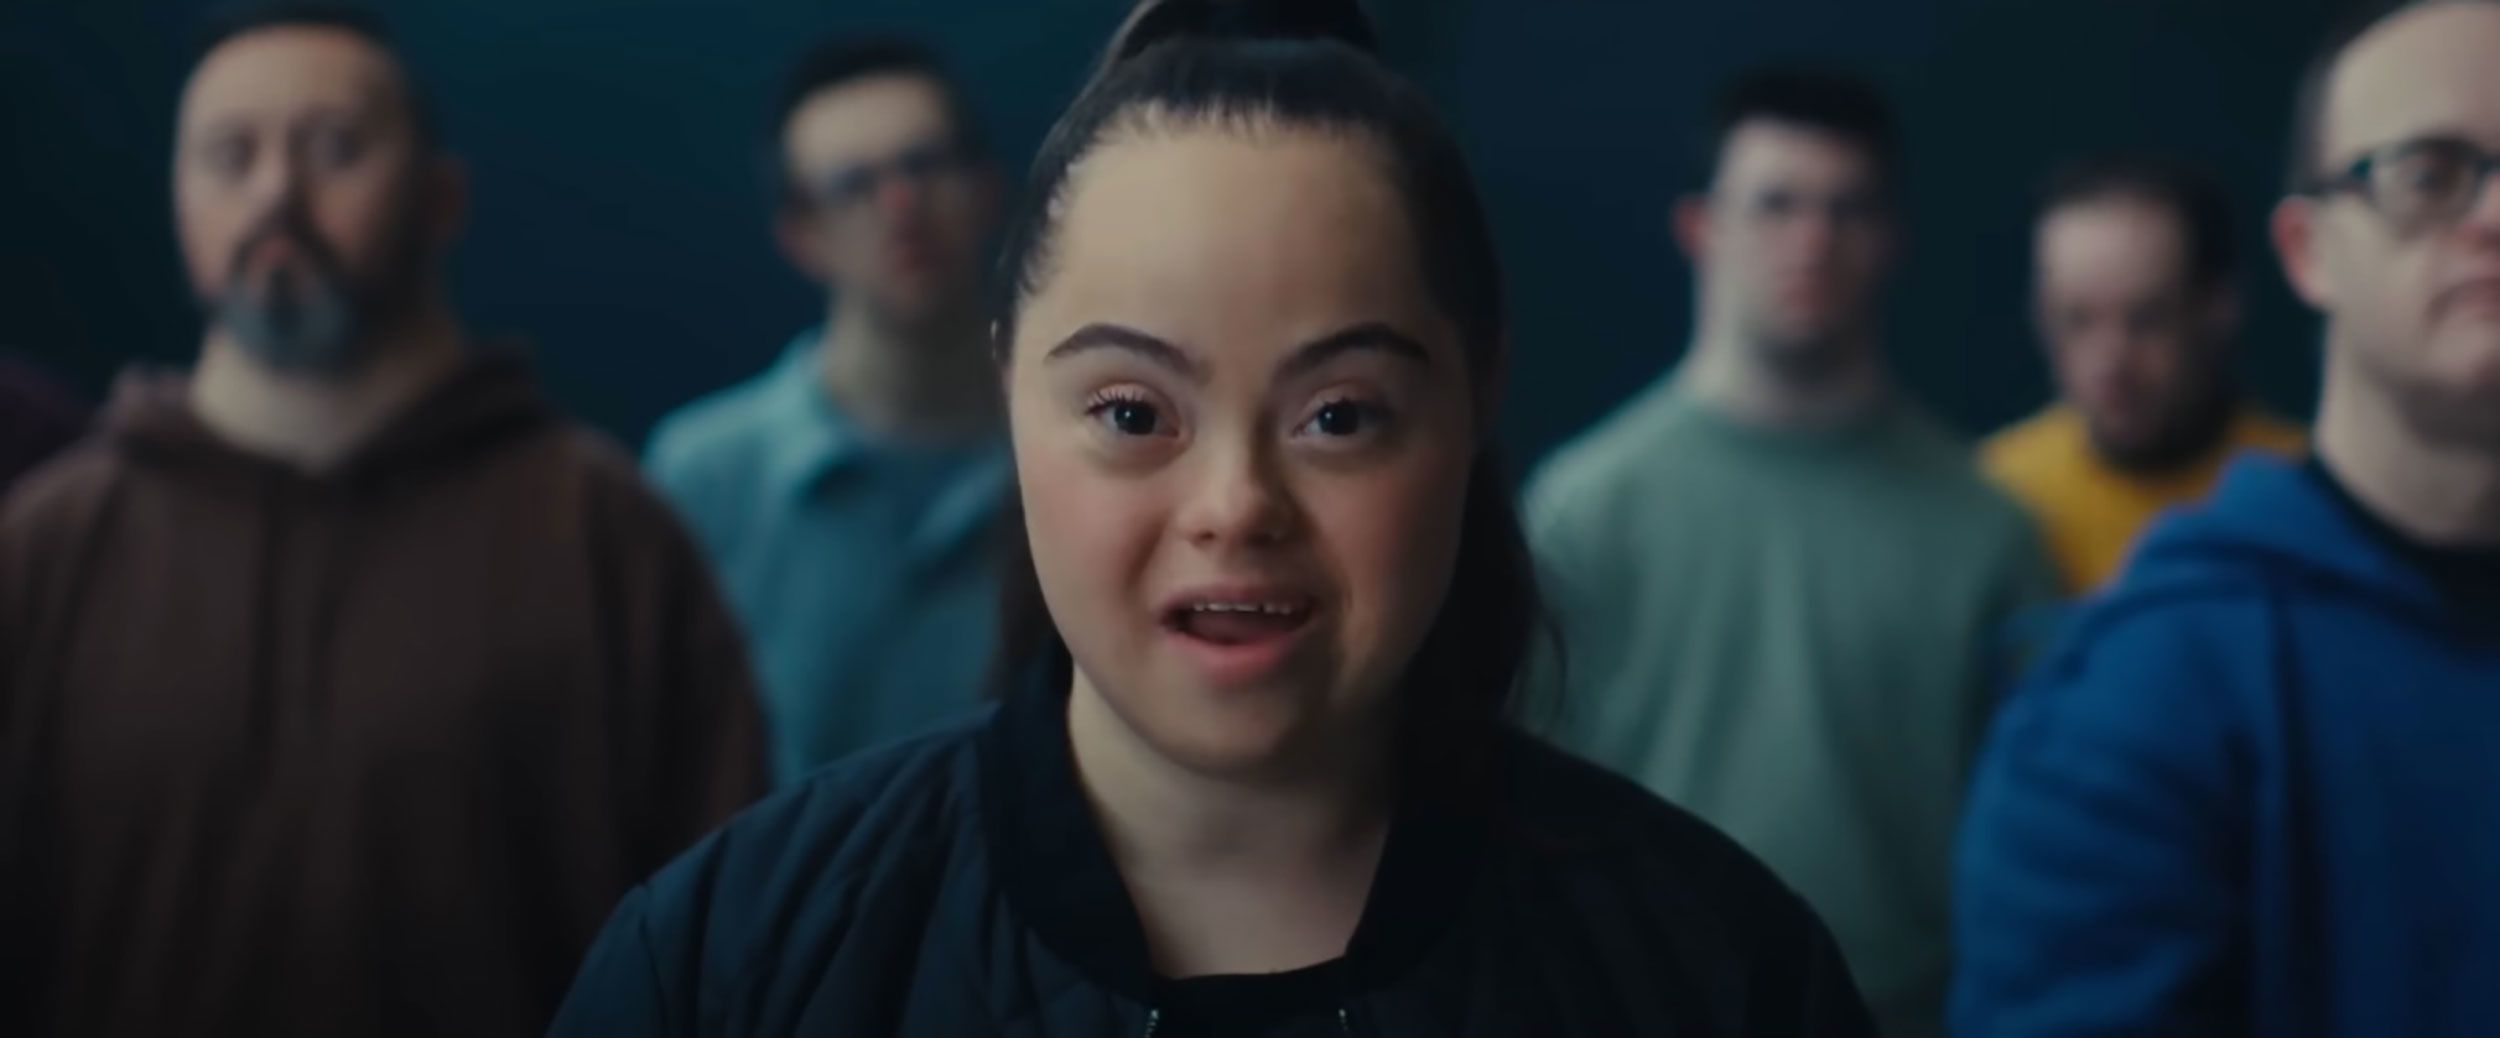 This Down Syndrome ad went viral. Now, its star talks about smashing assumptions - Opinion and Analysis - News